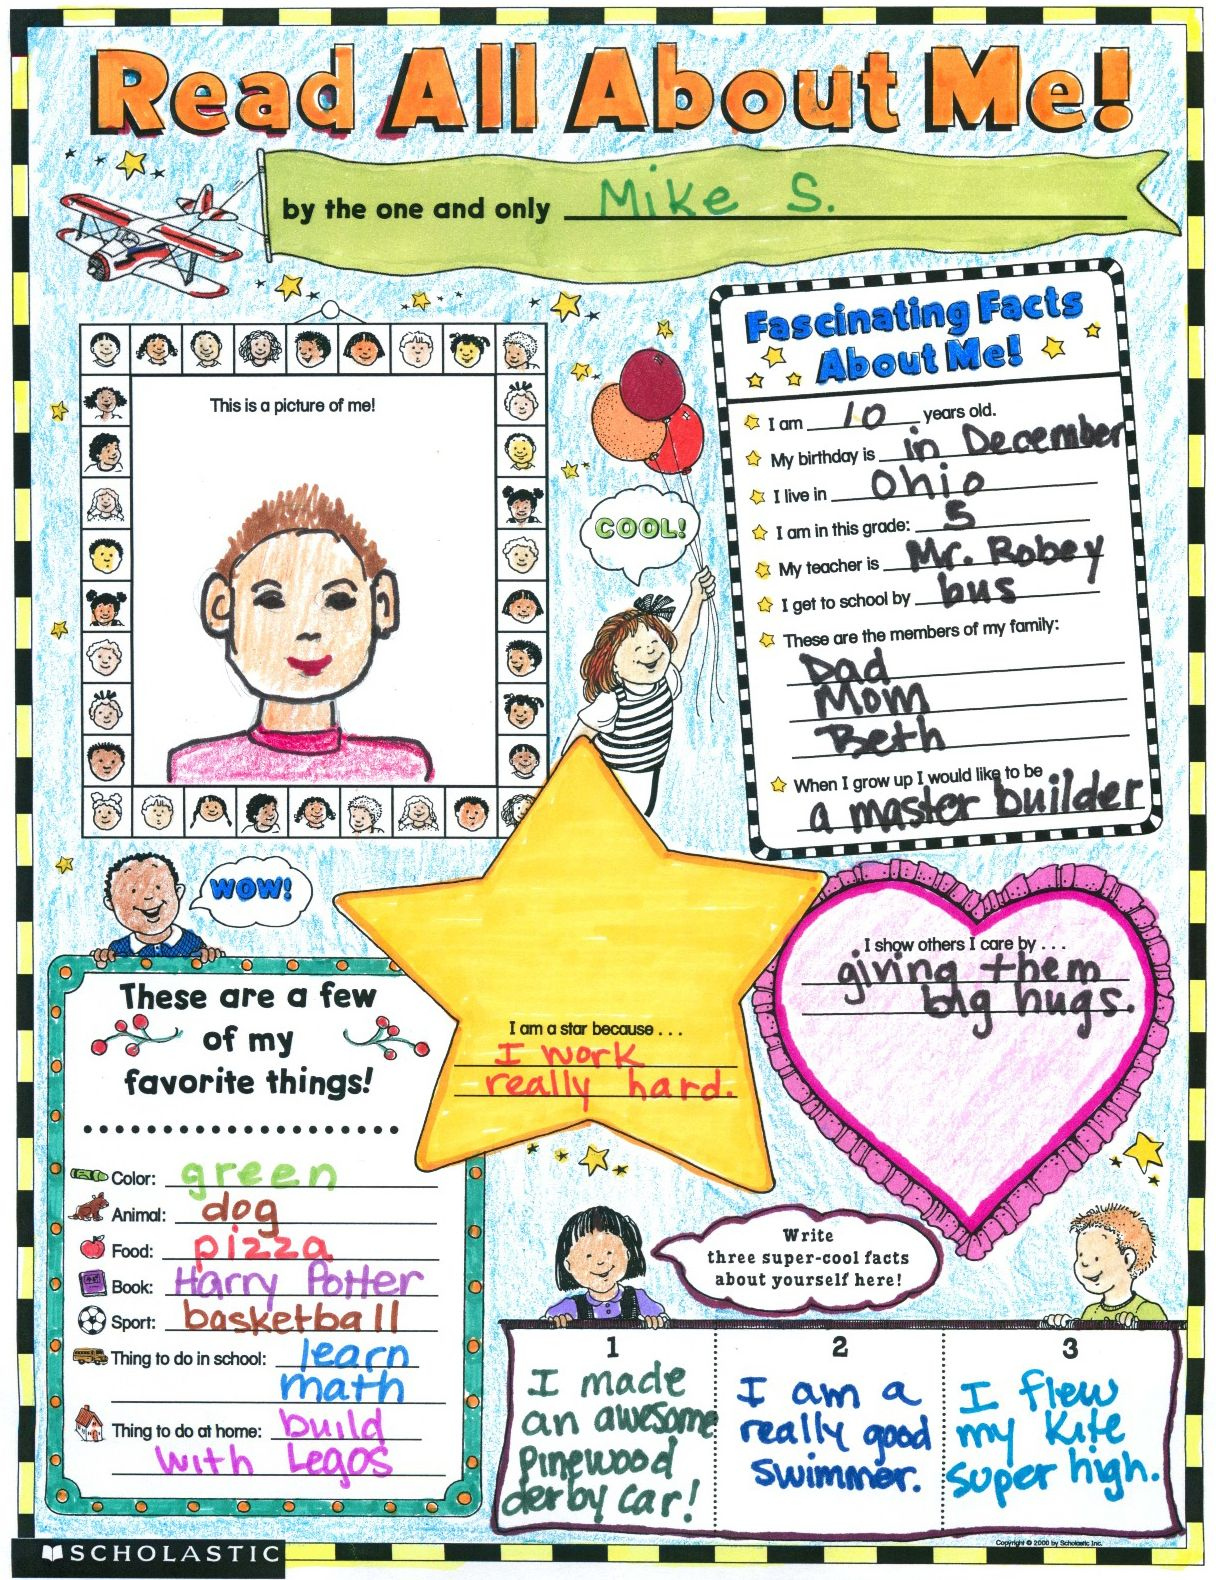 Read All About Me Poster Classroom Worksheet AllAboutMeActivities 